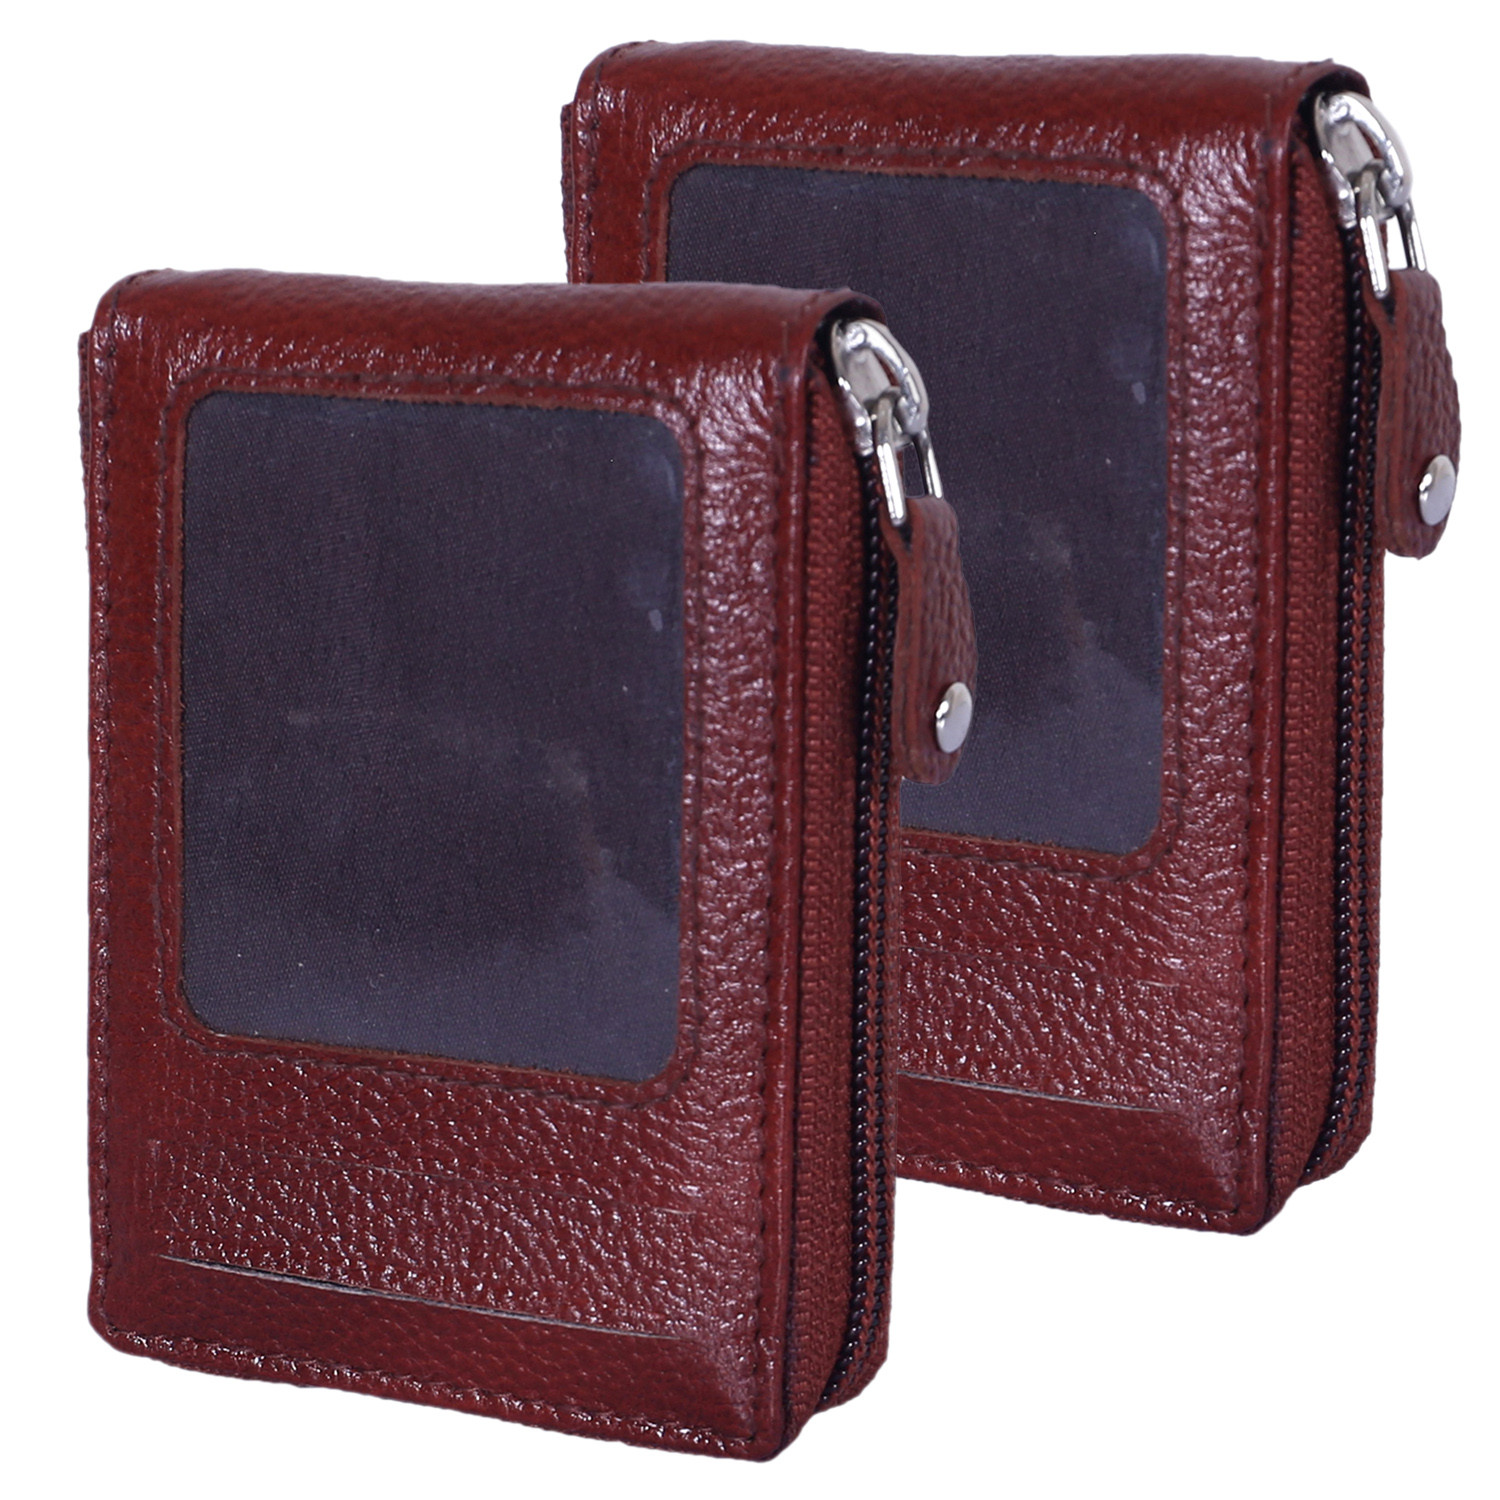 Kuber Industries Soft Leather Card Holder | Zipper Wallet For Man & Woman With 11 Slot (Brown)